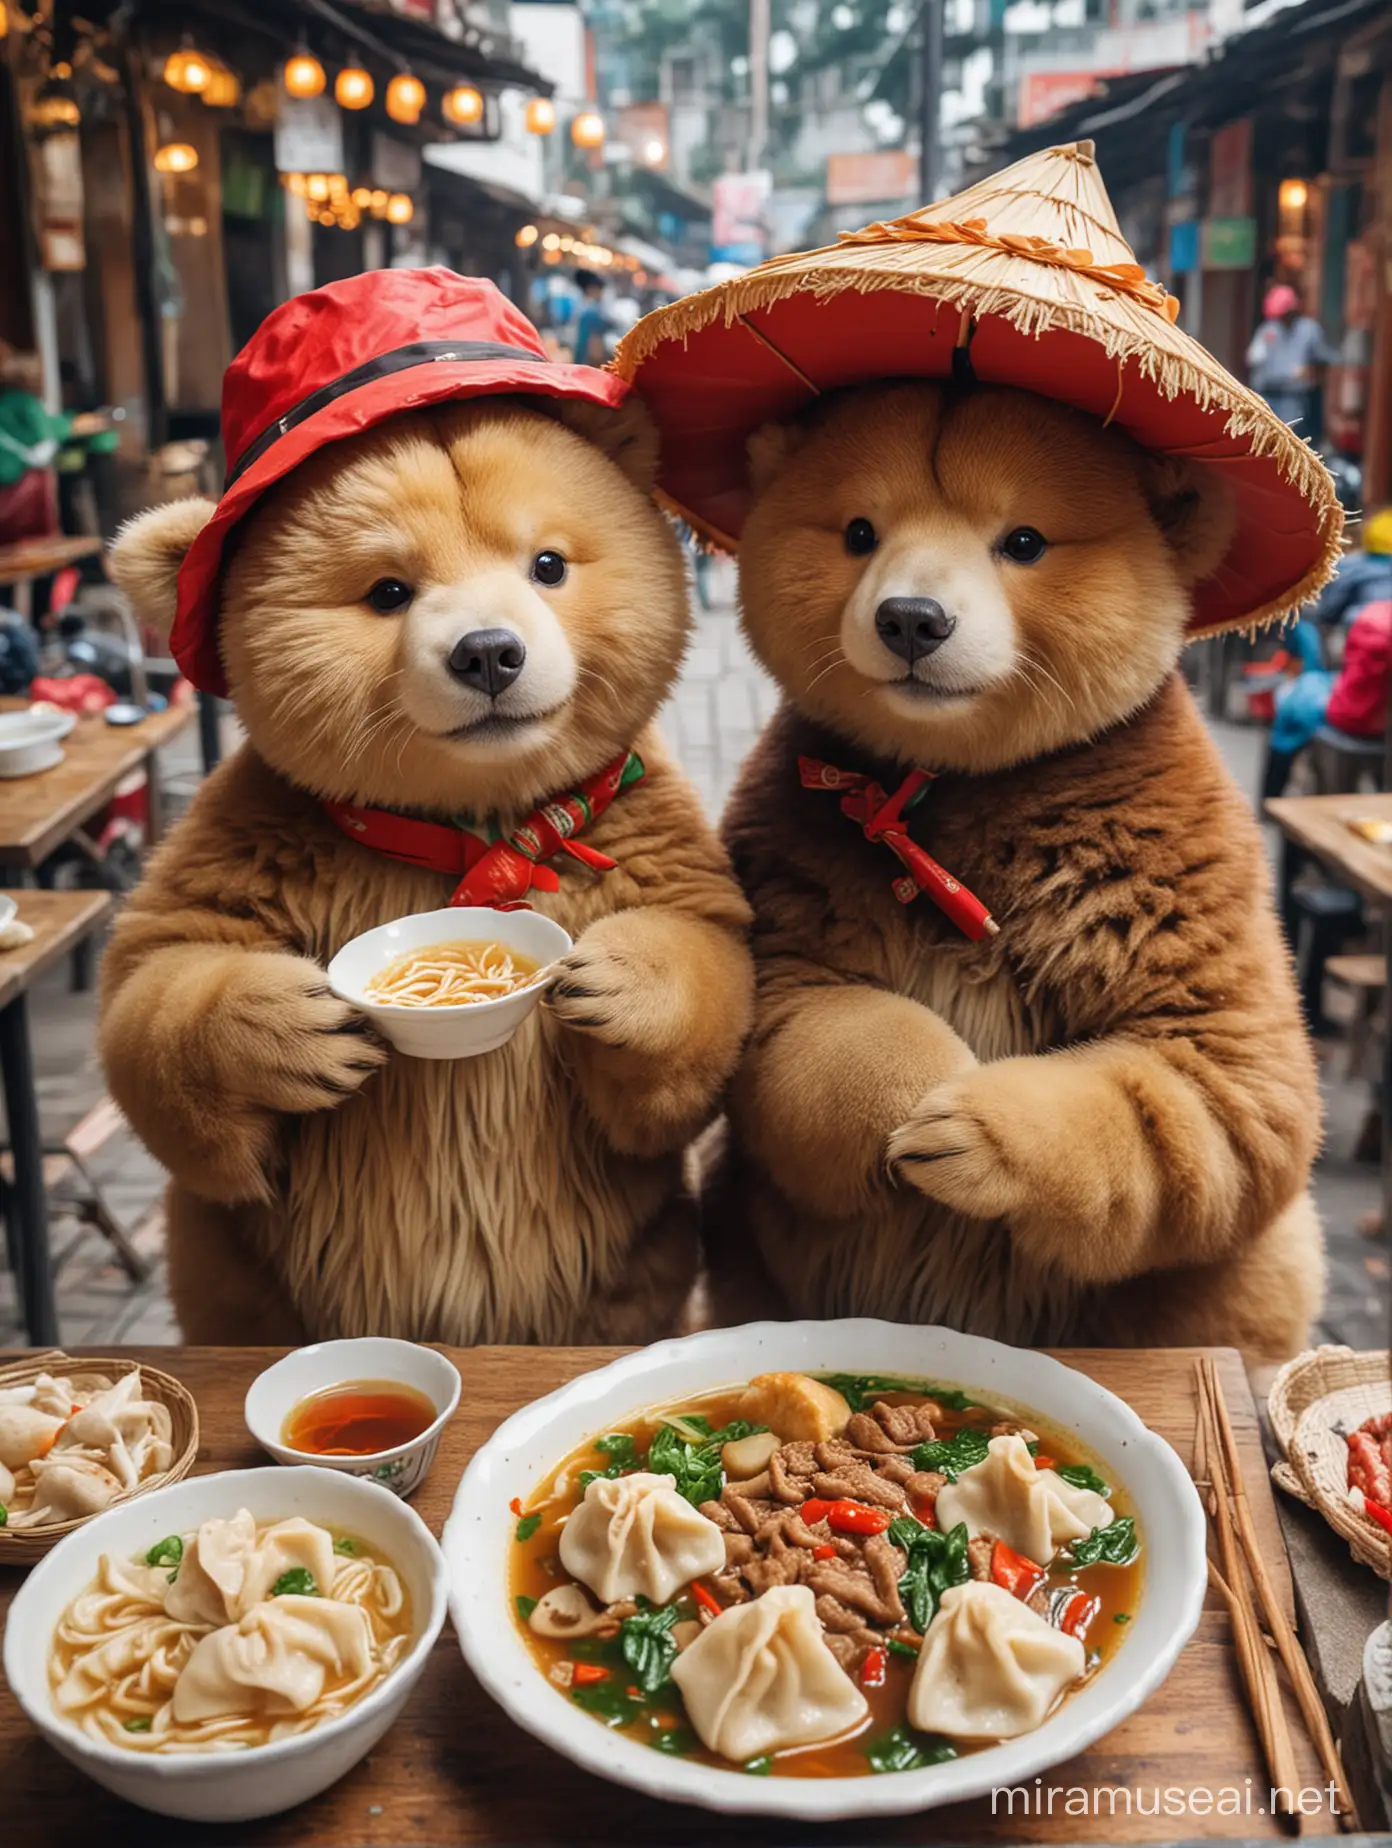 Bear and Cat Sharing Dumplings and Pho Soup in Vibrant Vietnamese Street Food Scene